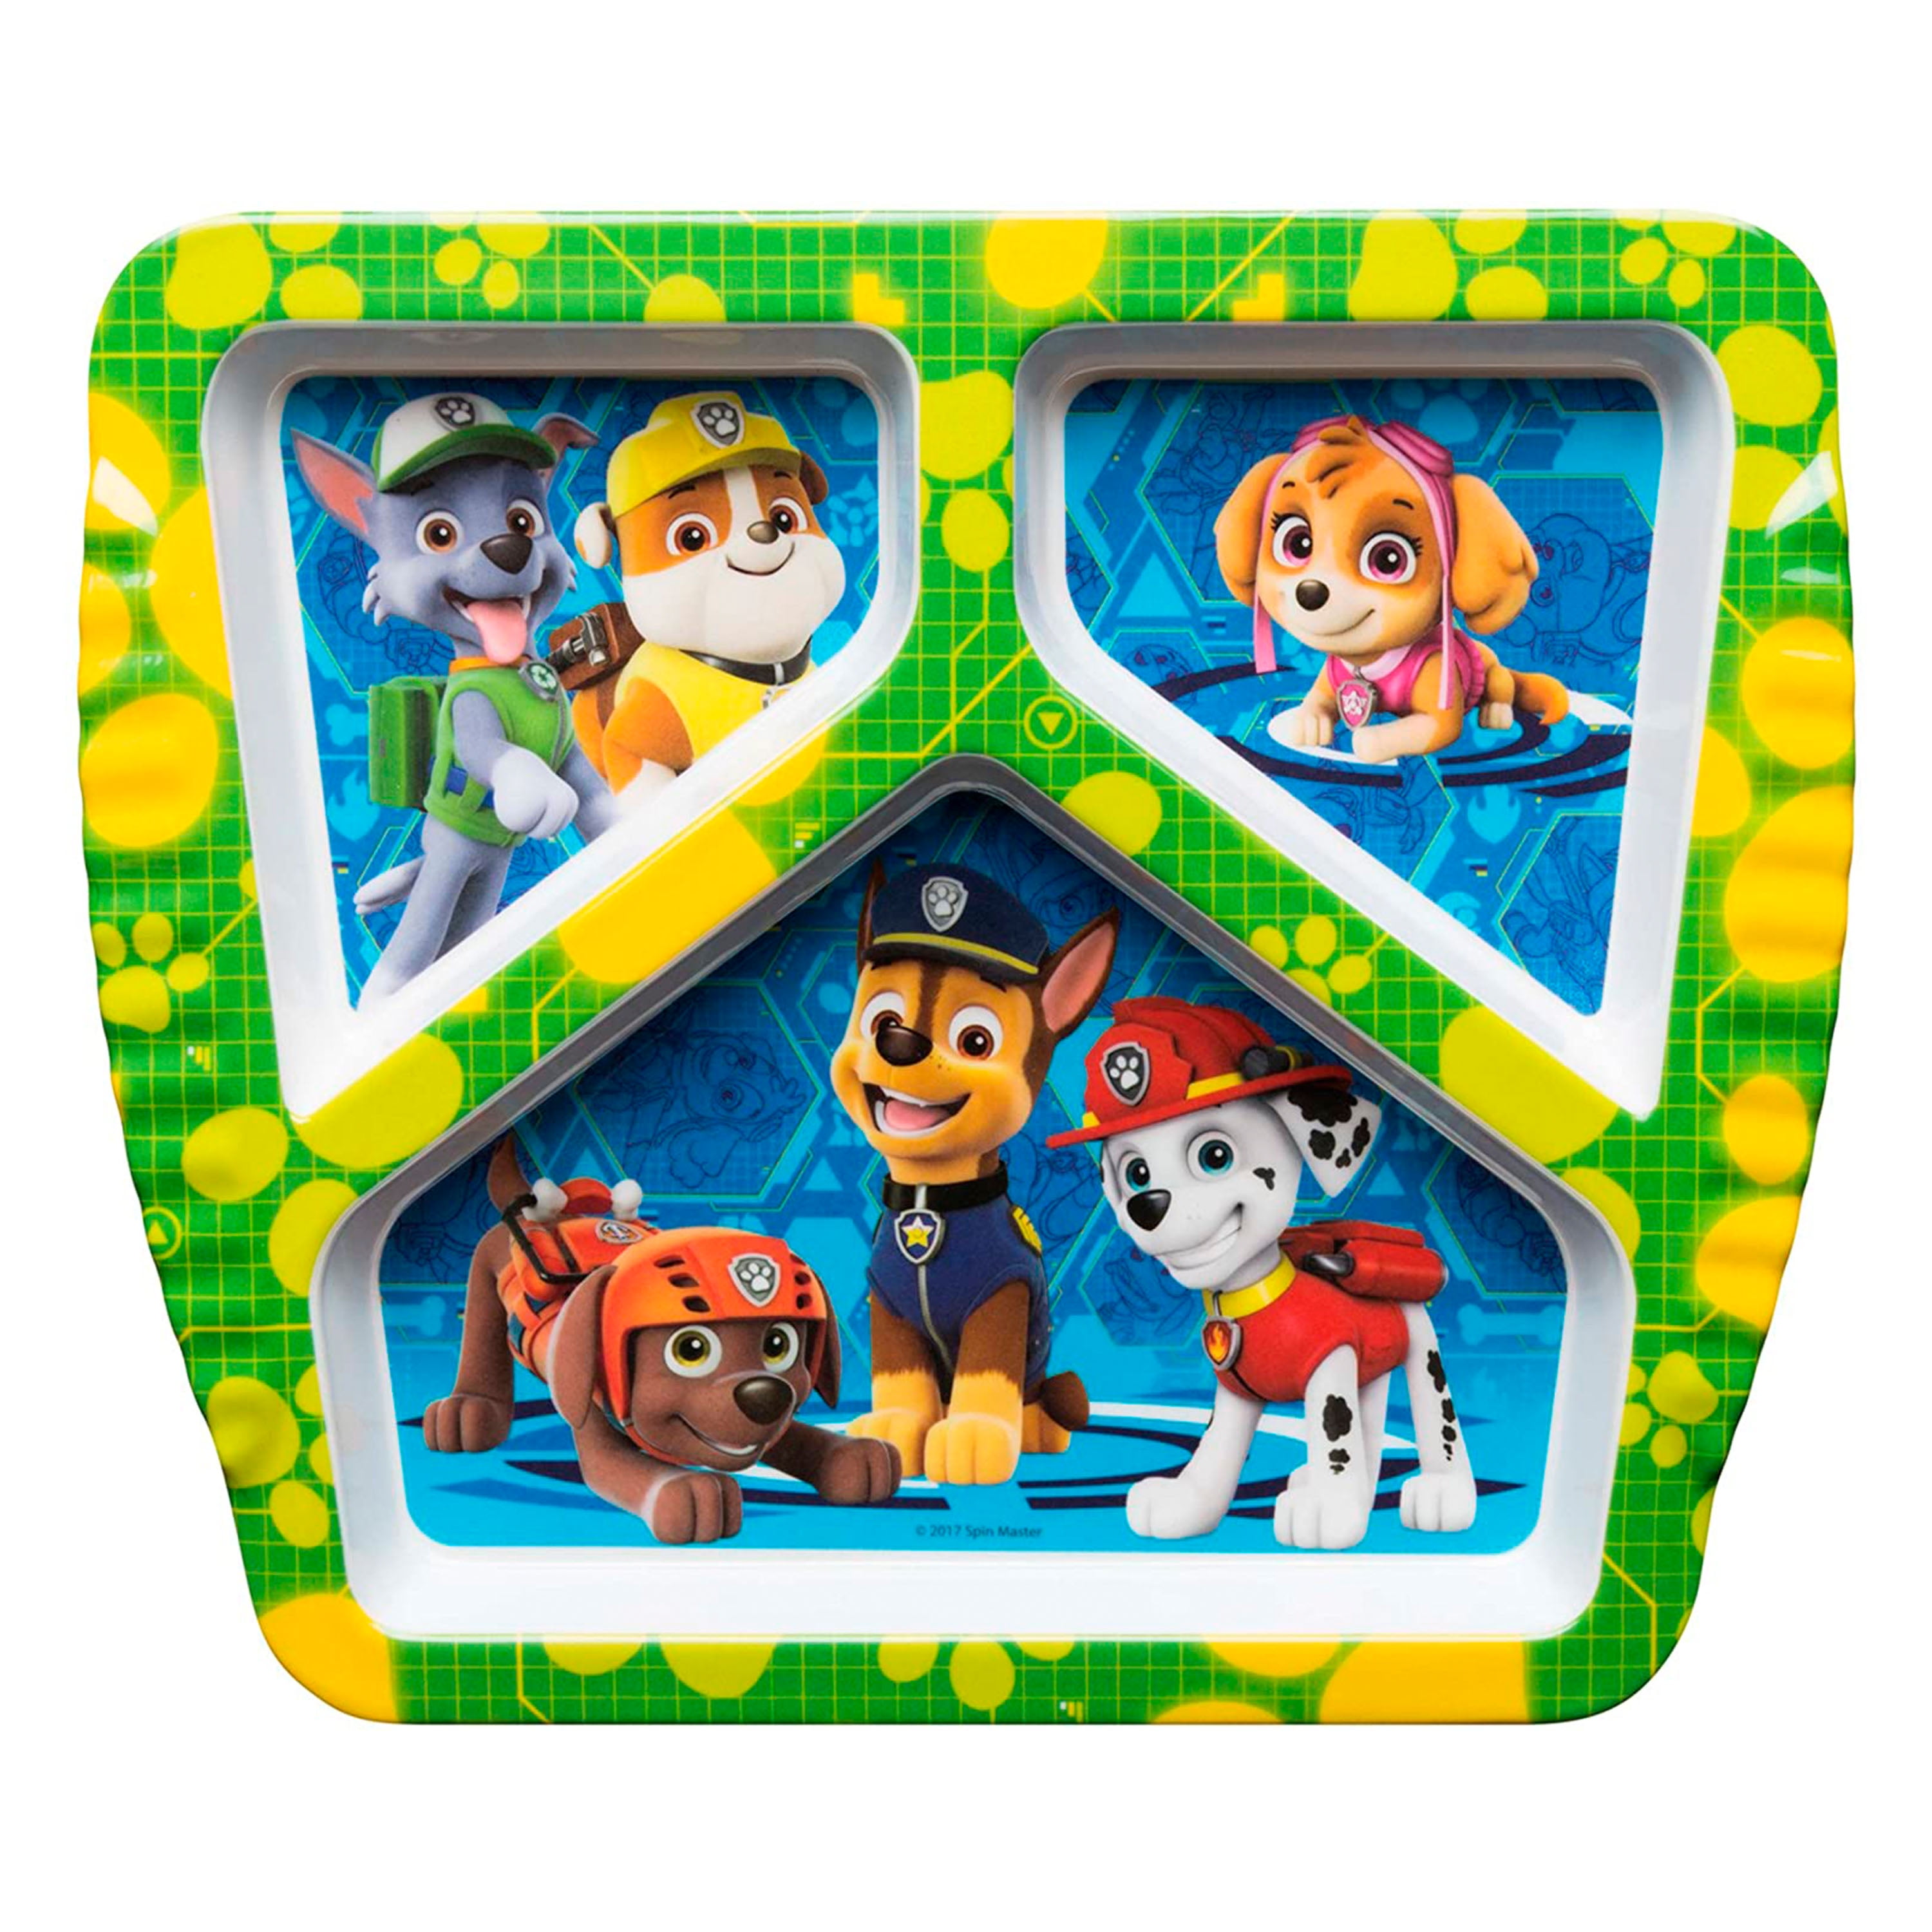 Paw Patrol ZAK! White, Blue & Red Banded Bamboo 3-Piece Dinnerware